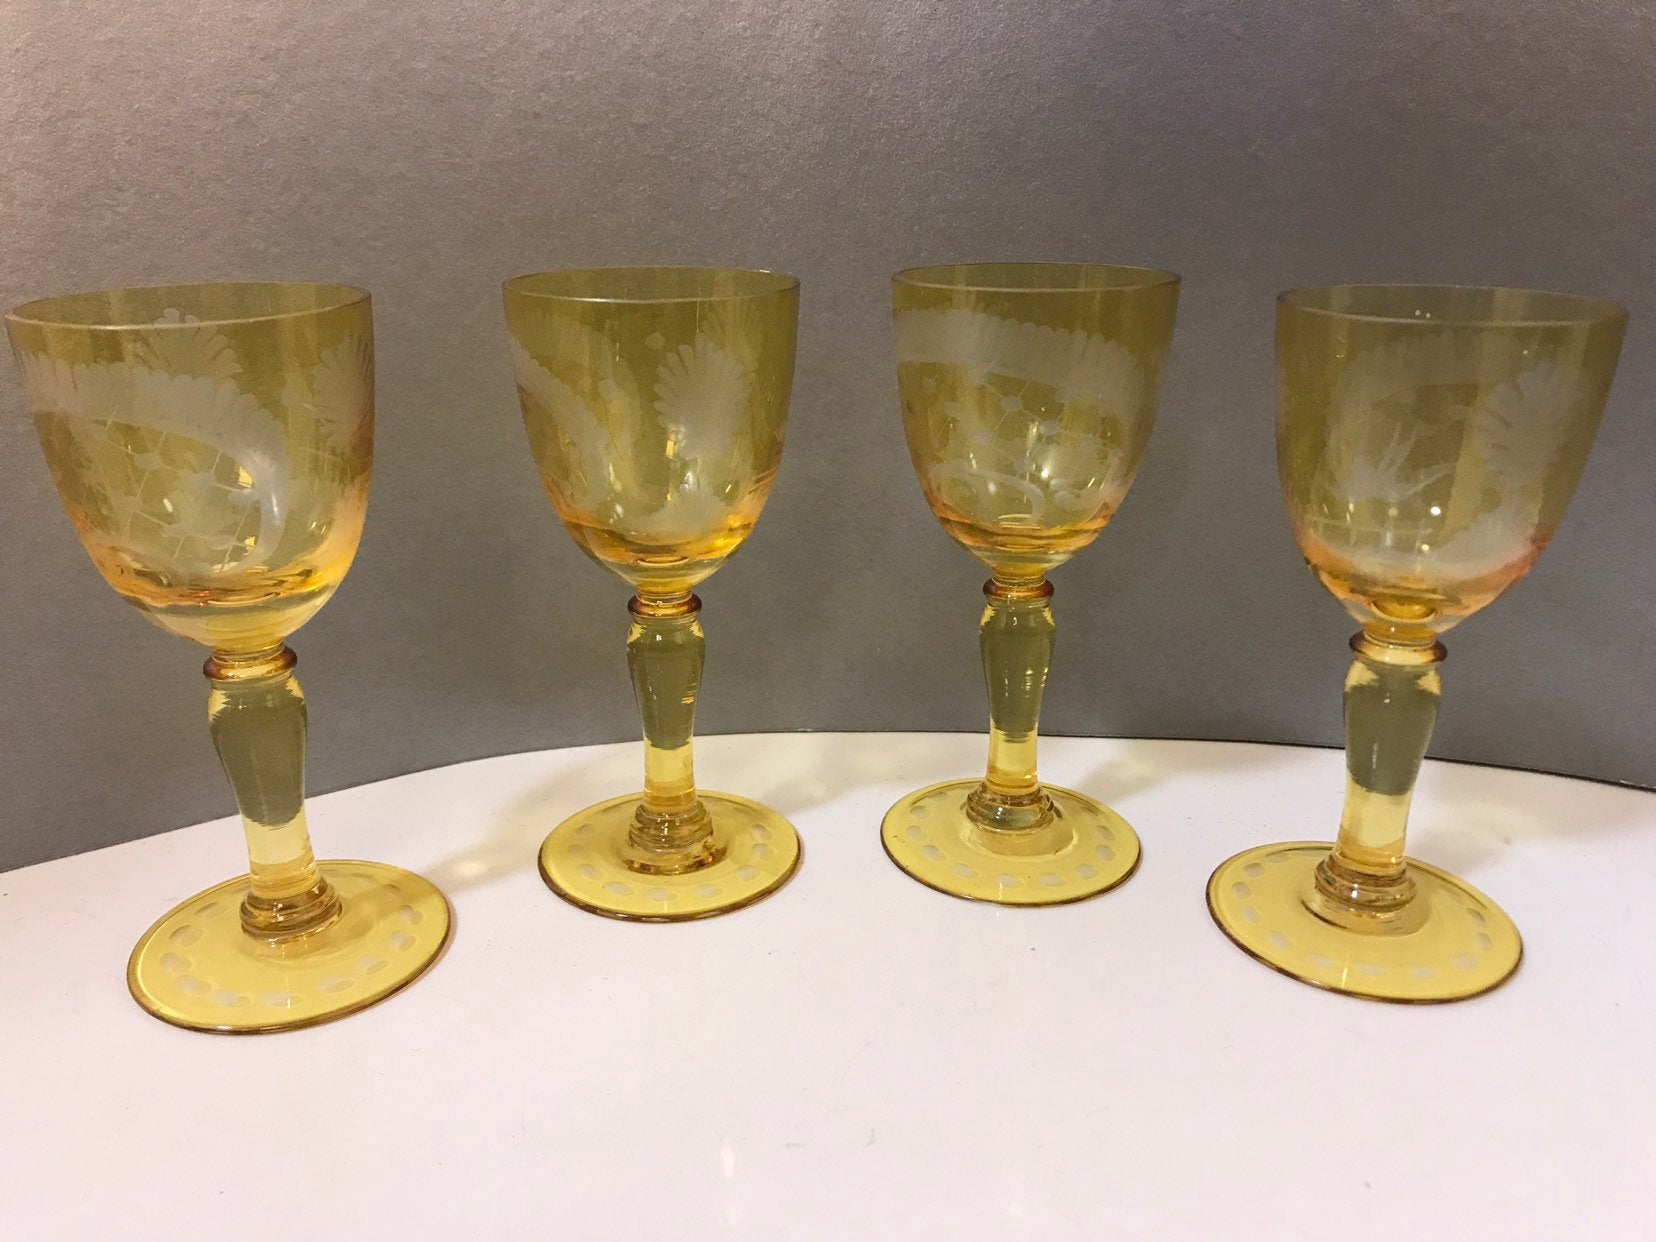 6 Vintage Etched Tall Wine Glasses ~ Water Goblets, 1950's Etched